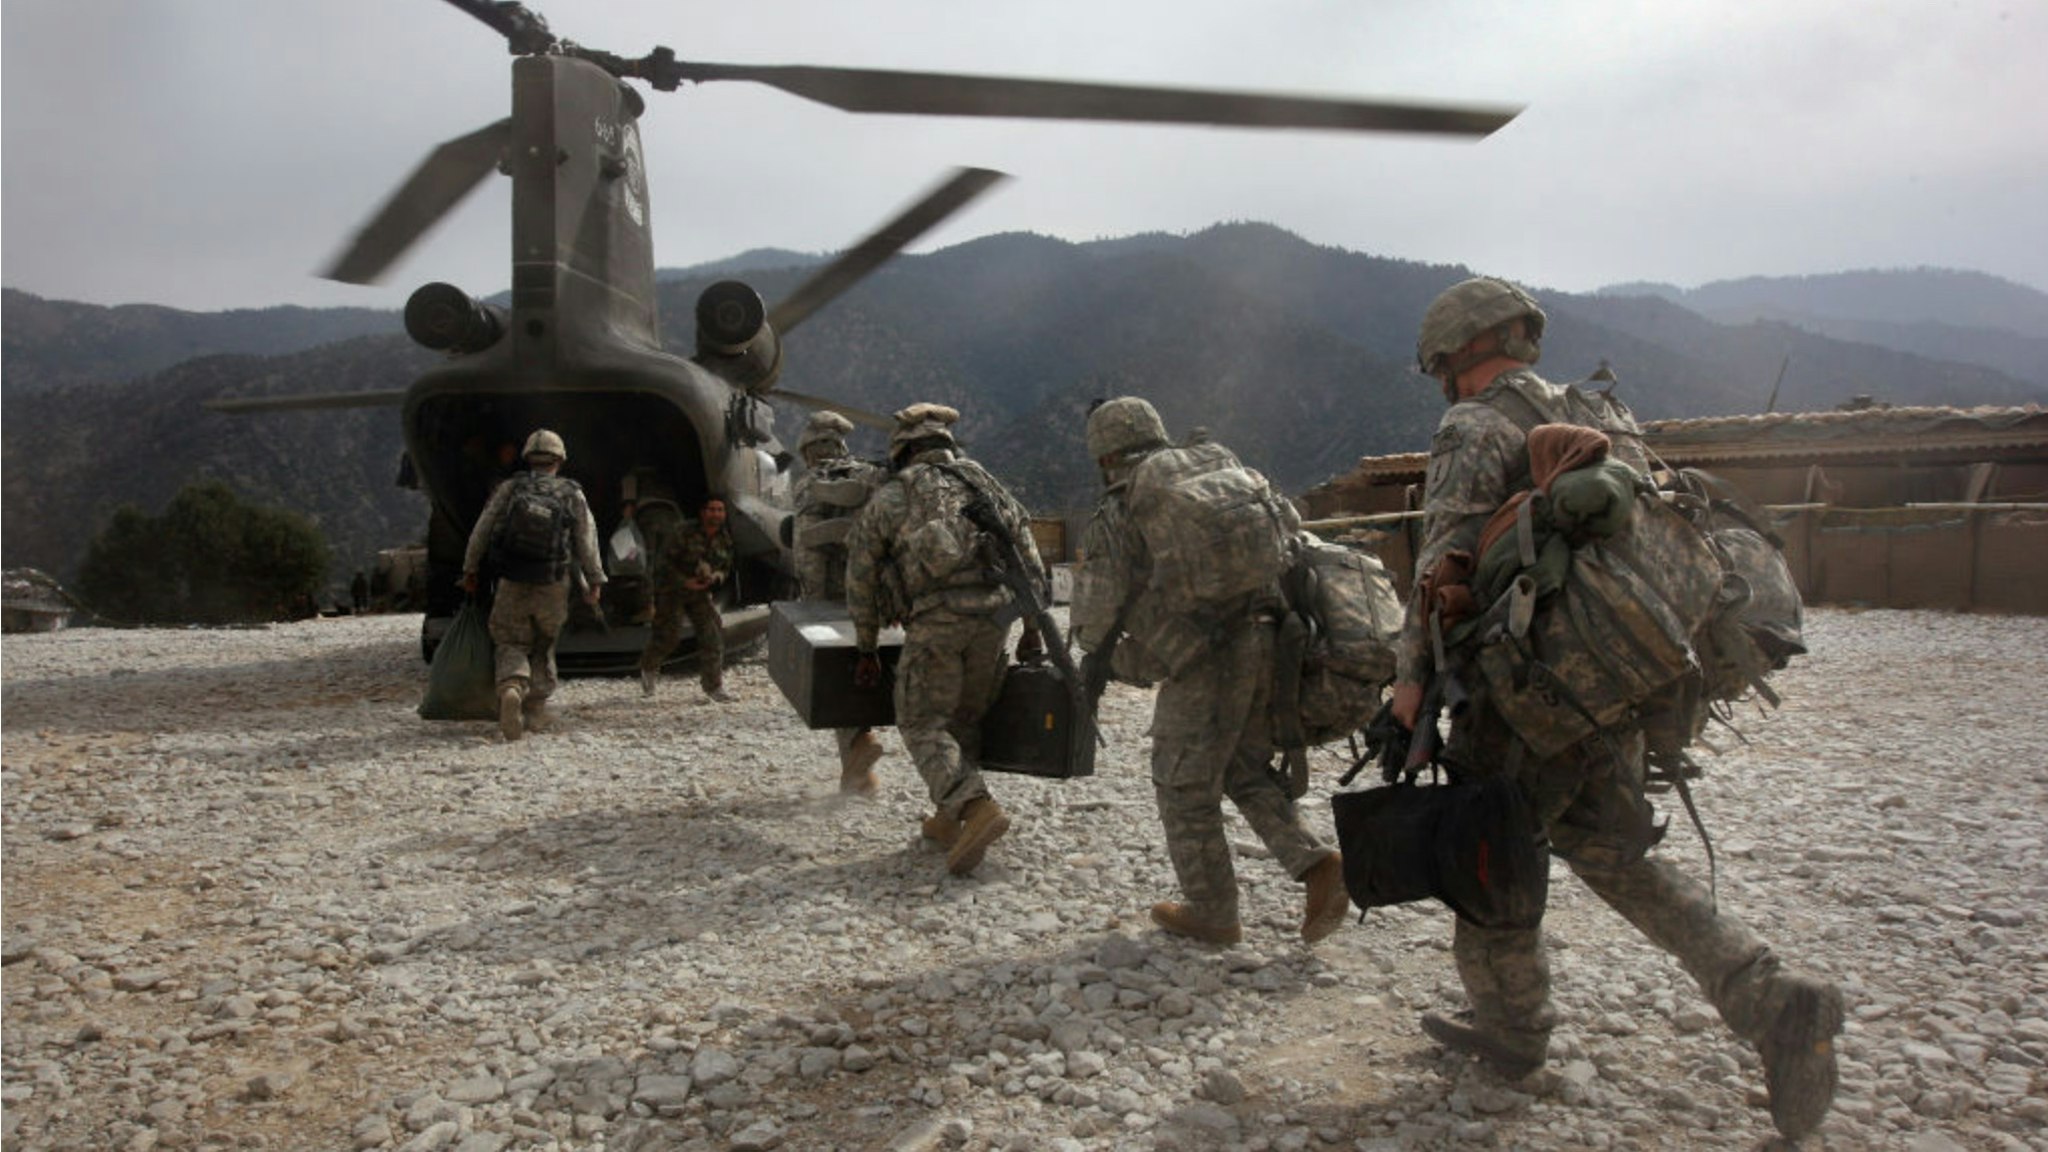 U.S. soldiers board an Army Chinook transport helicopter after it brought fresh soldiers and supplies to the Korengal Outpost on October 27, 2008 in the Korengal Valley, Afghanistan.